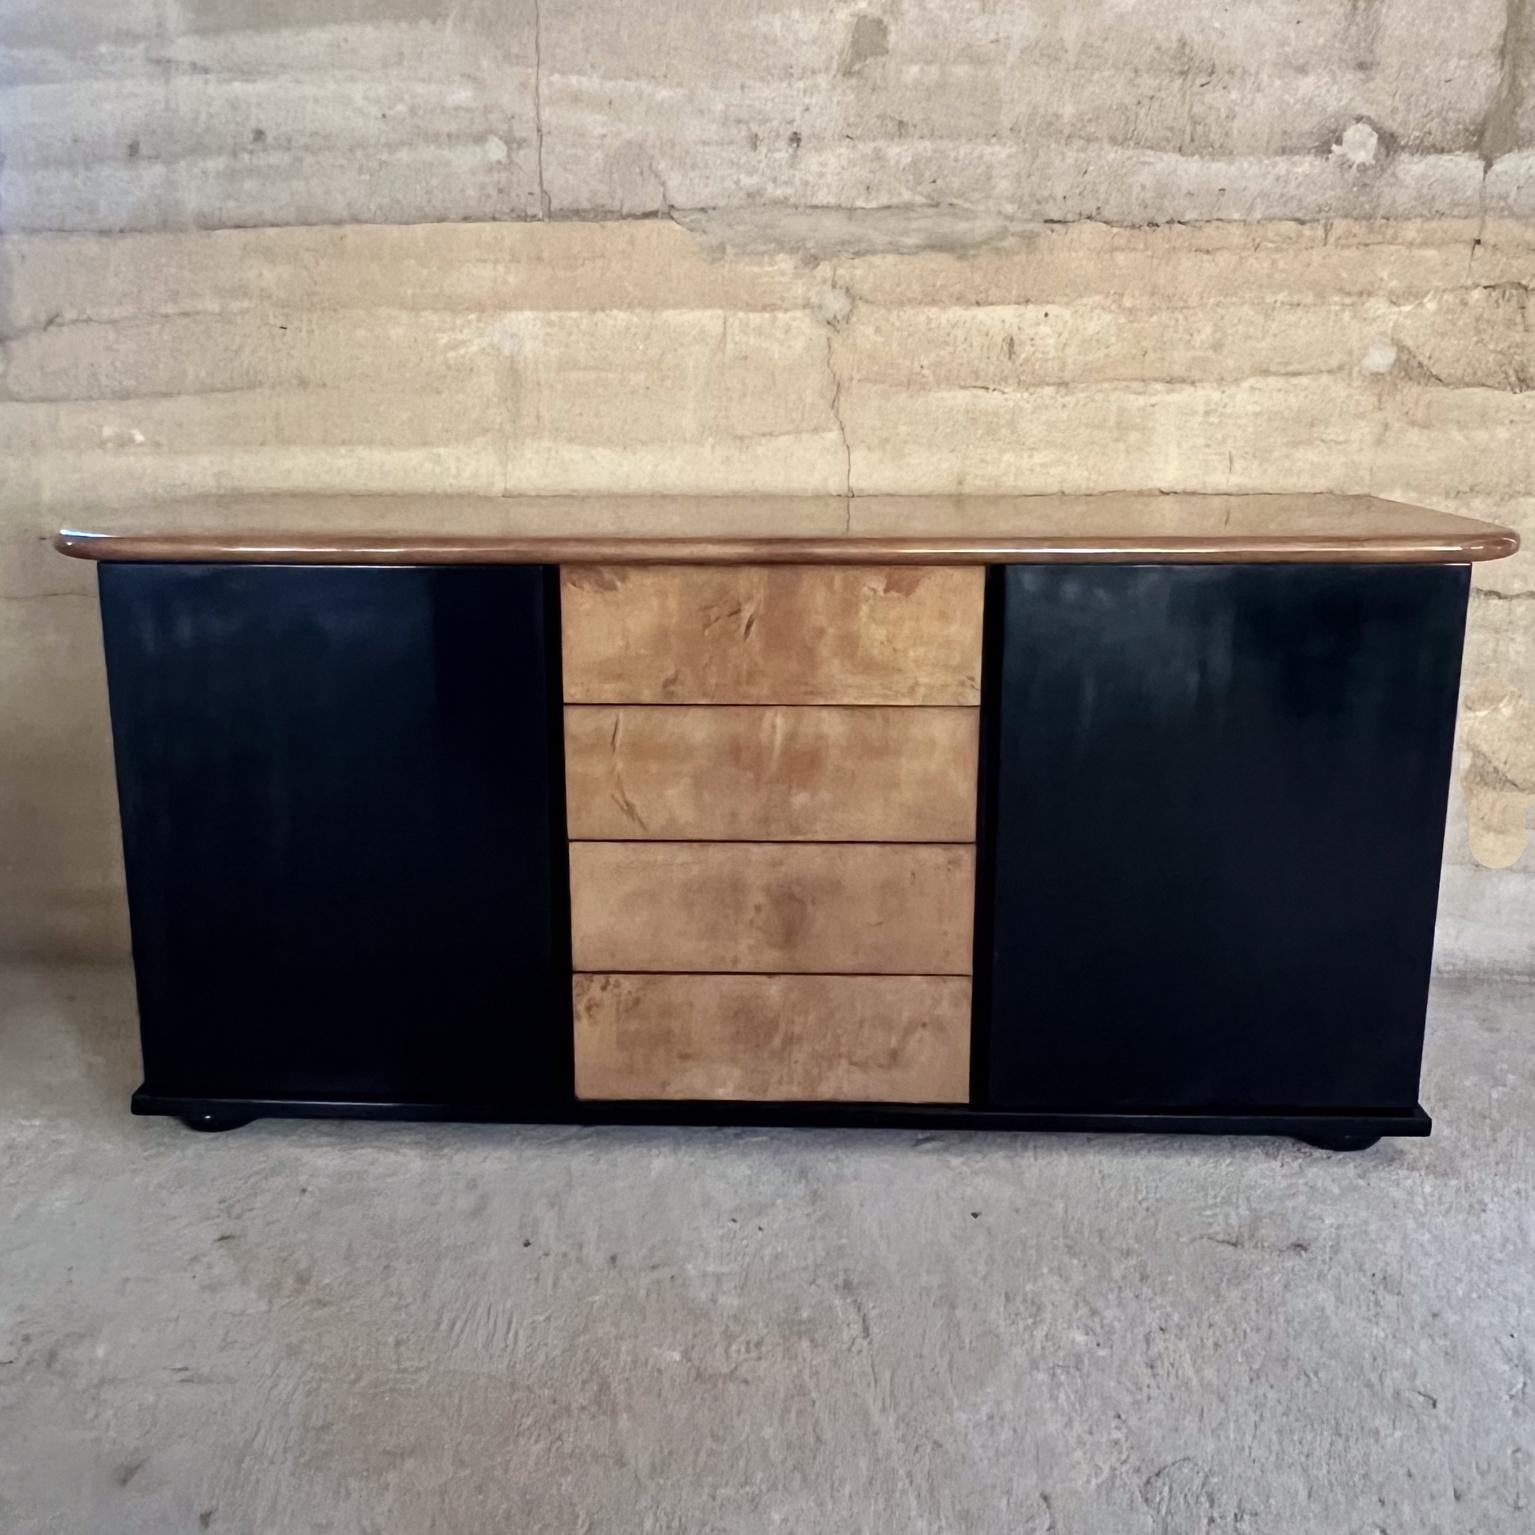 1950s Luscious Goatskin Credenza-Sideboard-Cabinet. 
68 w x 31 h x 21.25
Open storage left and right sides with glass shelves. 
High quality brass pins hold glass in place. 
Sideboard Cabinet has original black gloss finish. 
Tabletop and 4 drawers